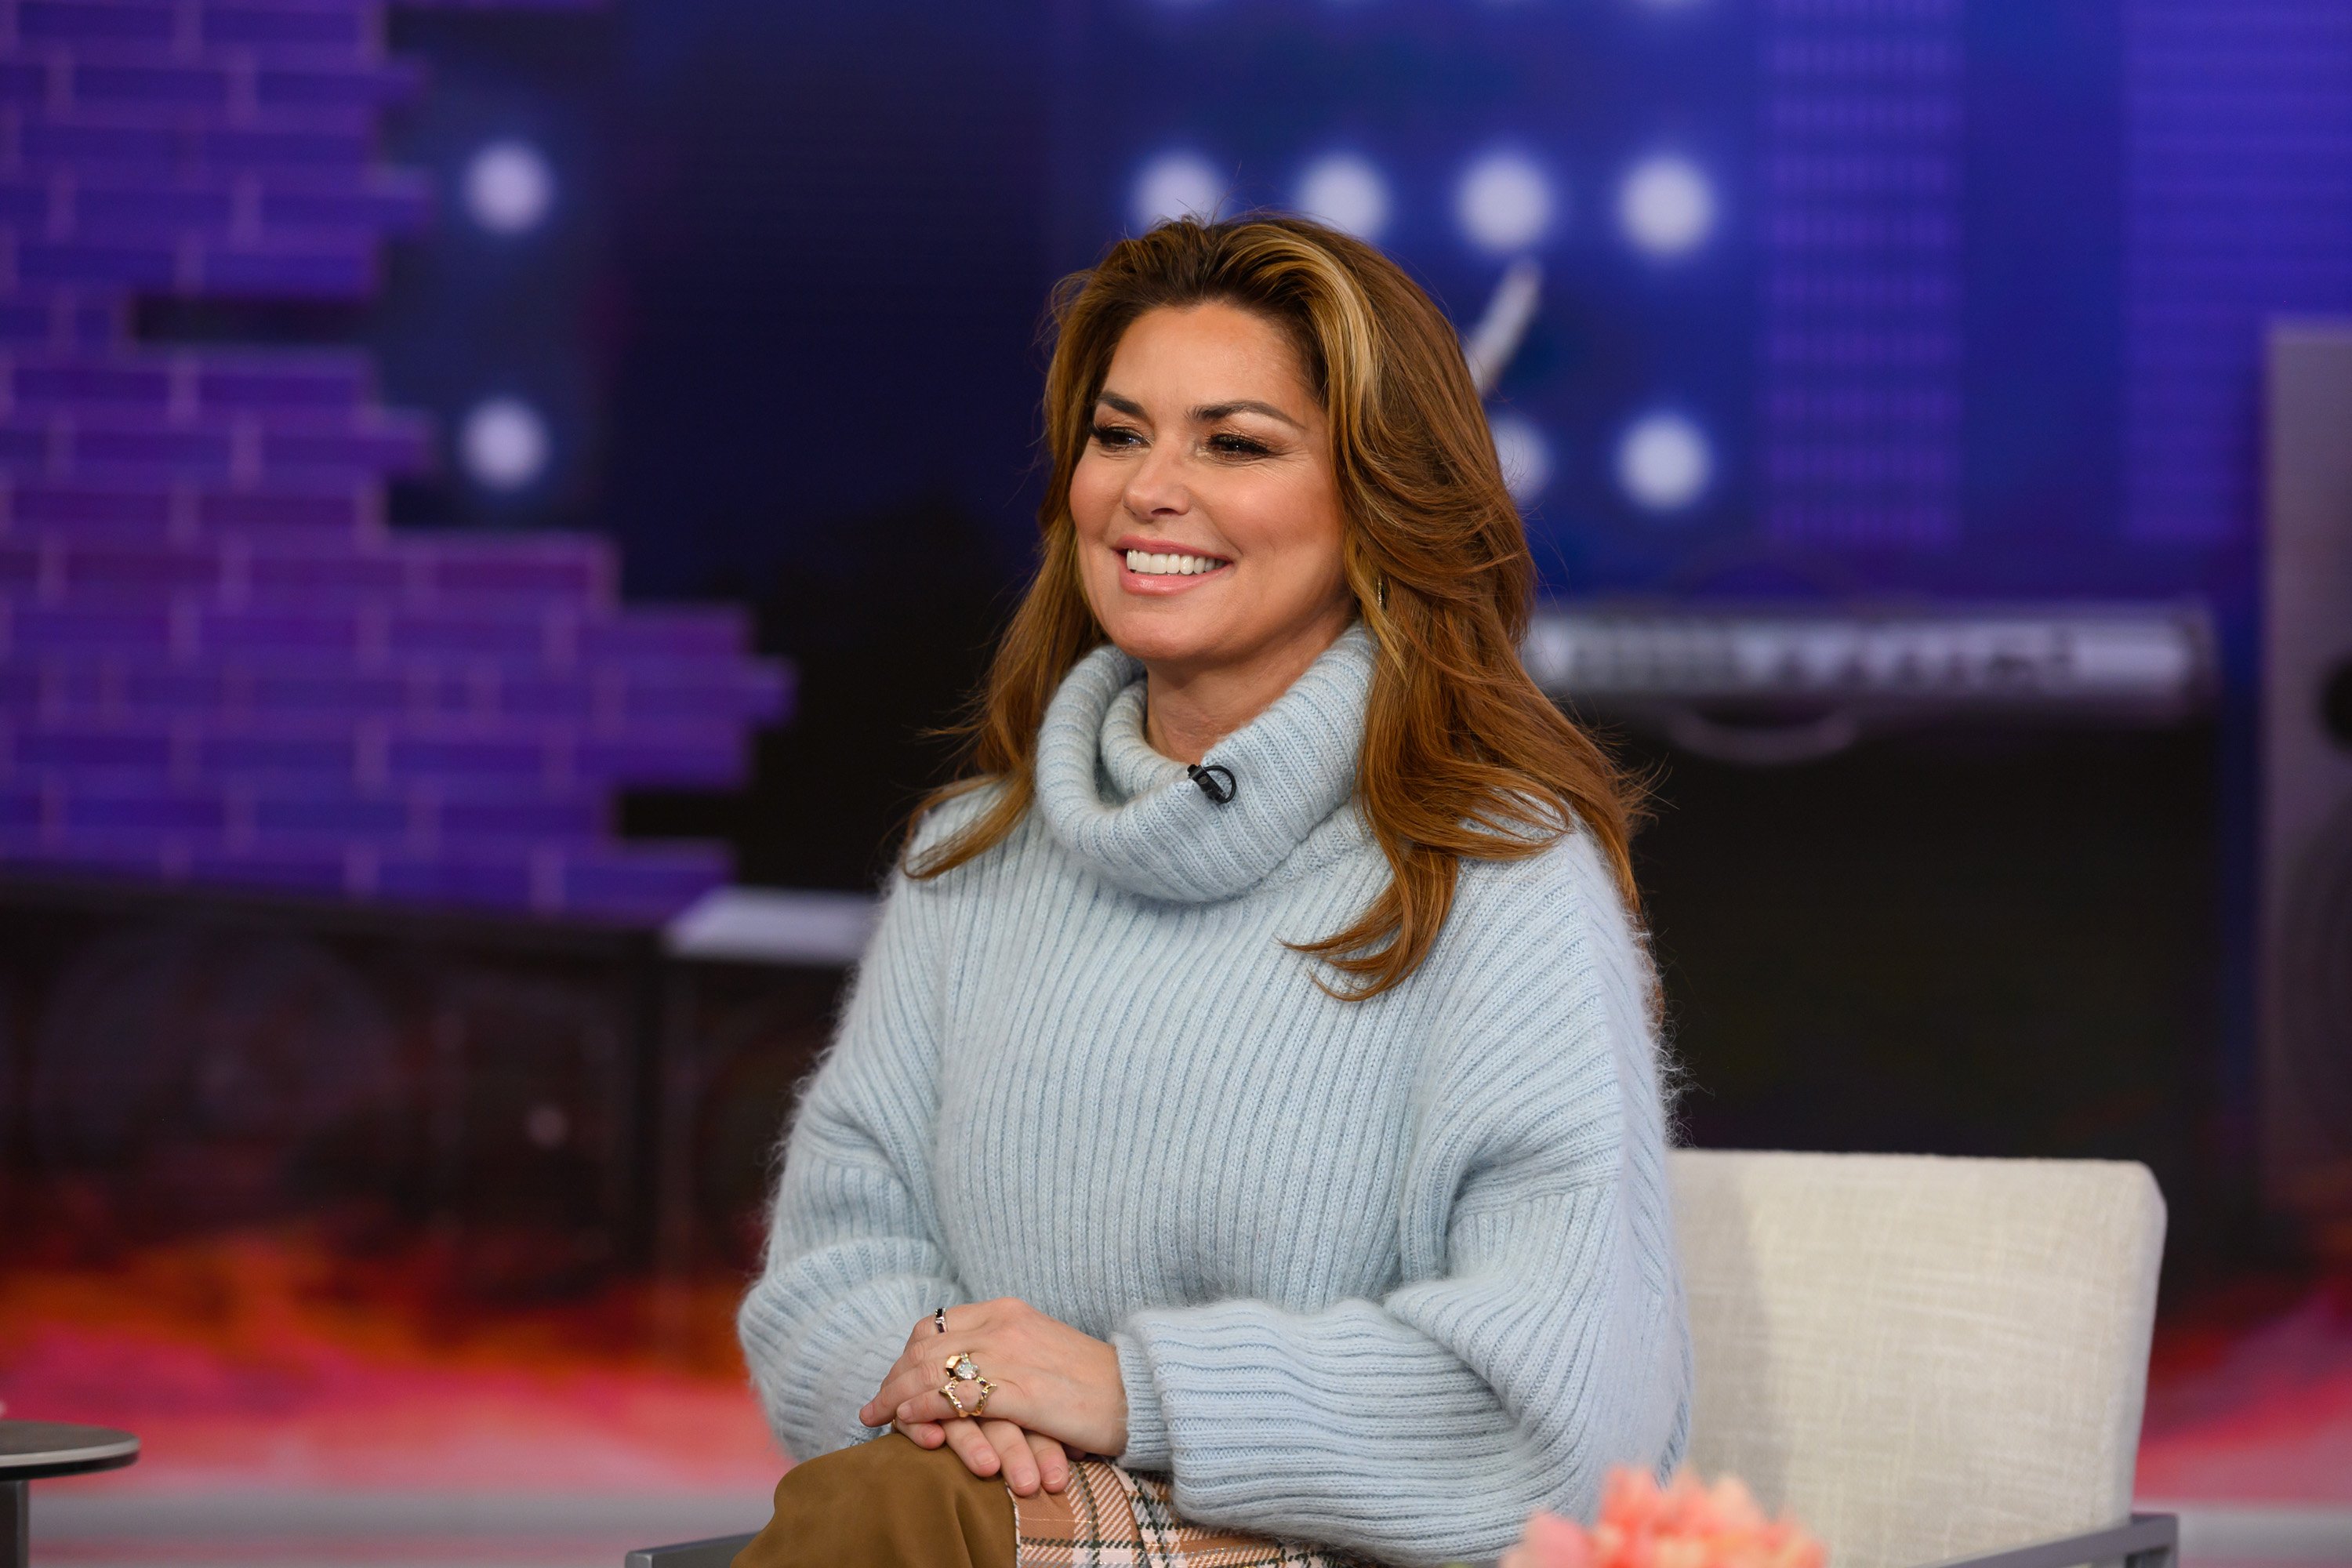 Singer and songwriter Shania Twain on 'Today'